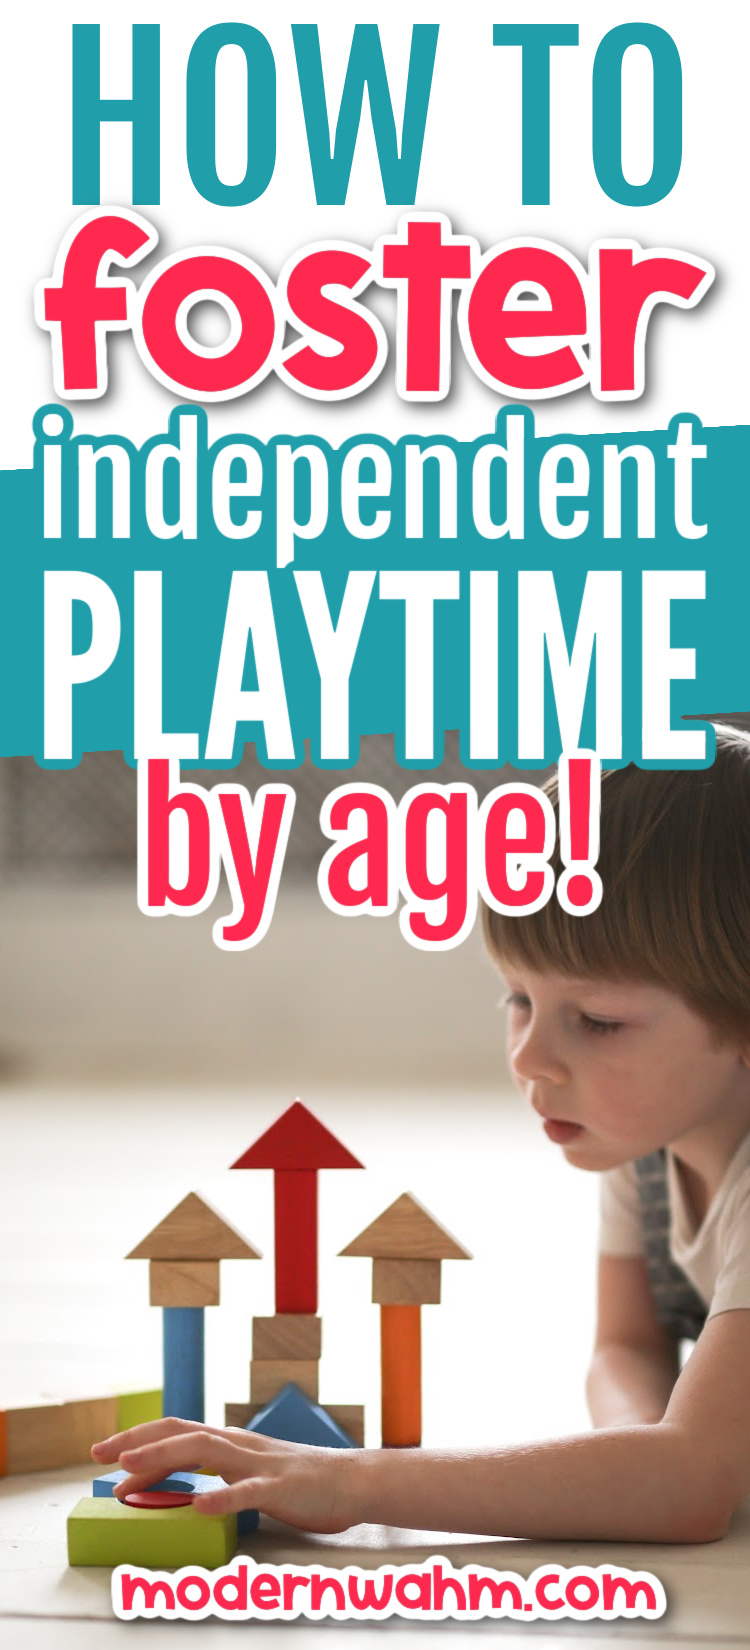 Independent Playtime for Kids By Age